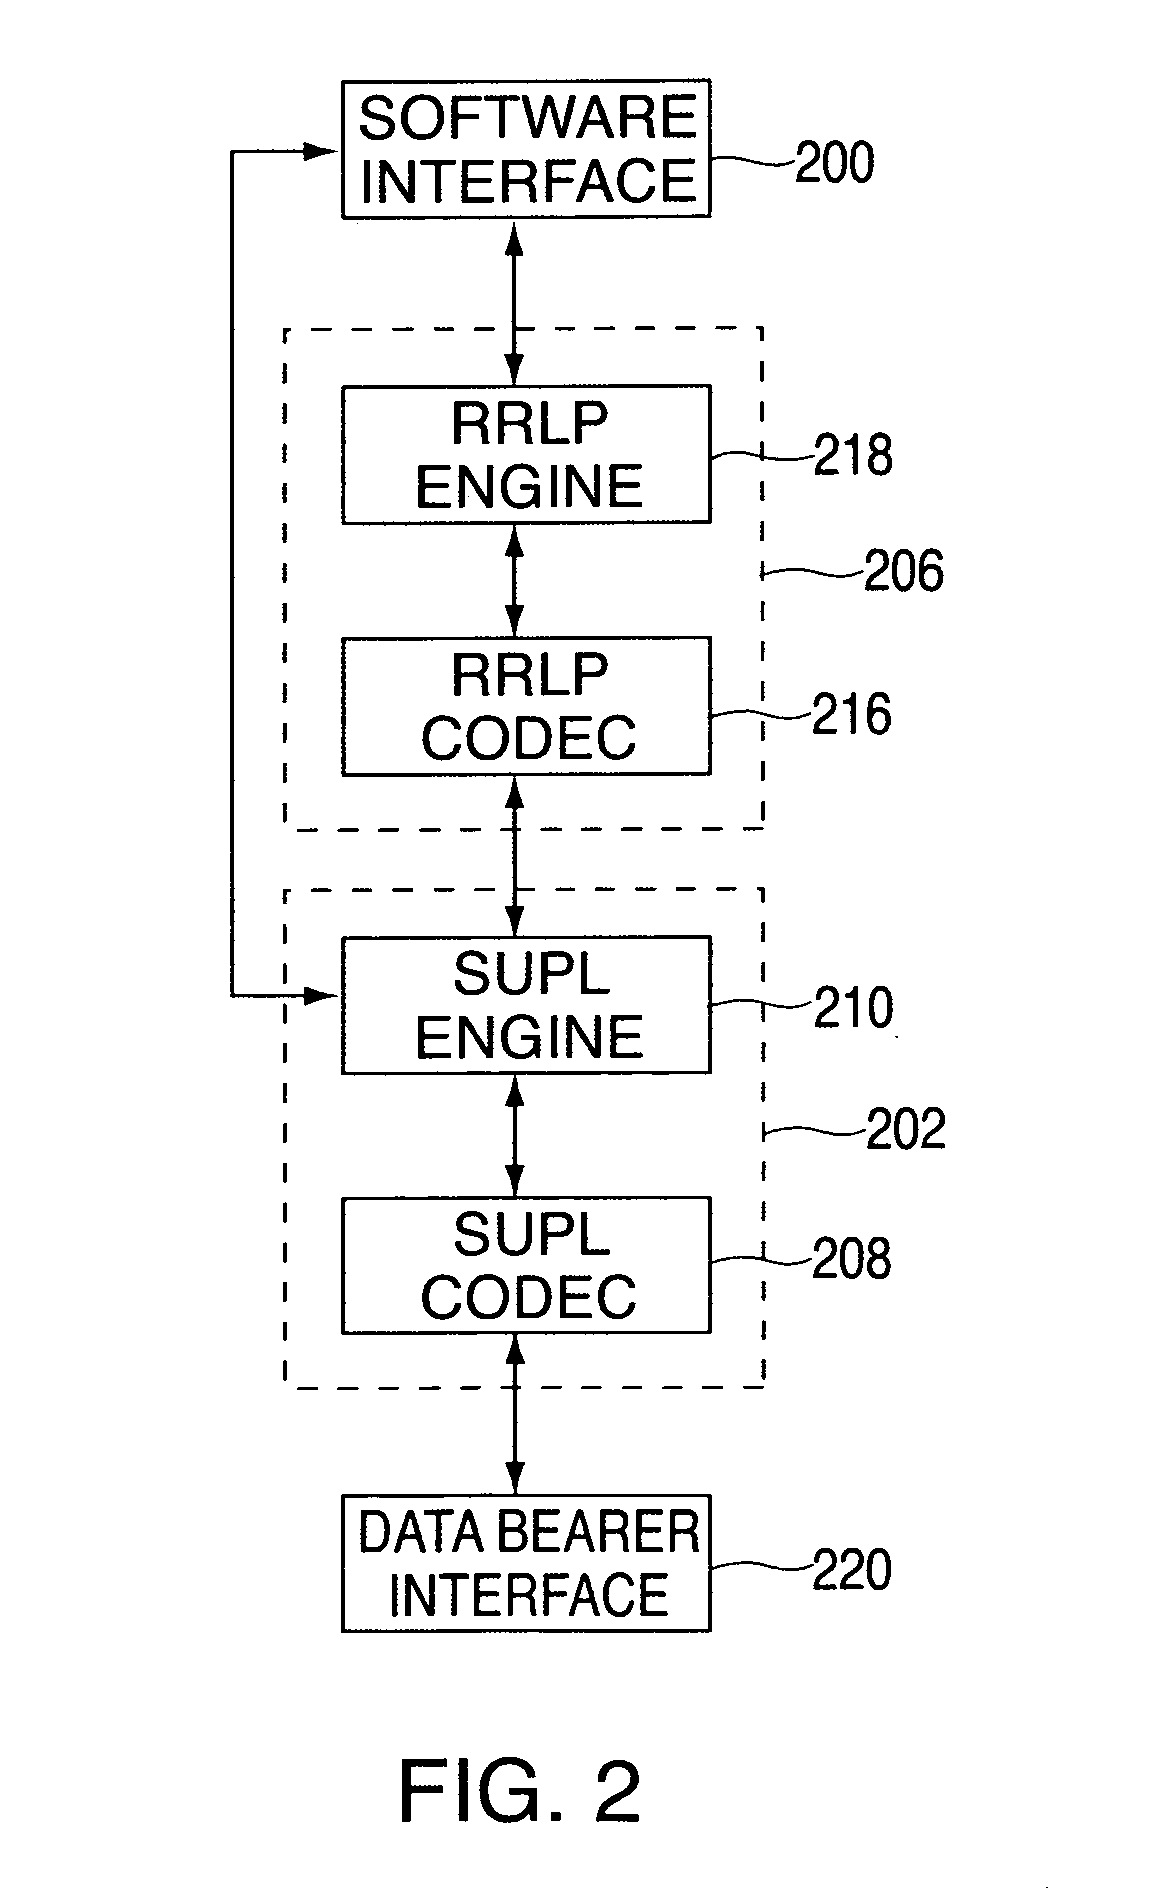 Method and apparatus for providing a global secure user plane location (SUPL) service